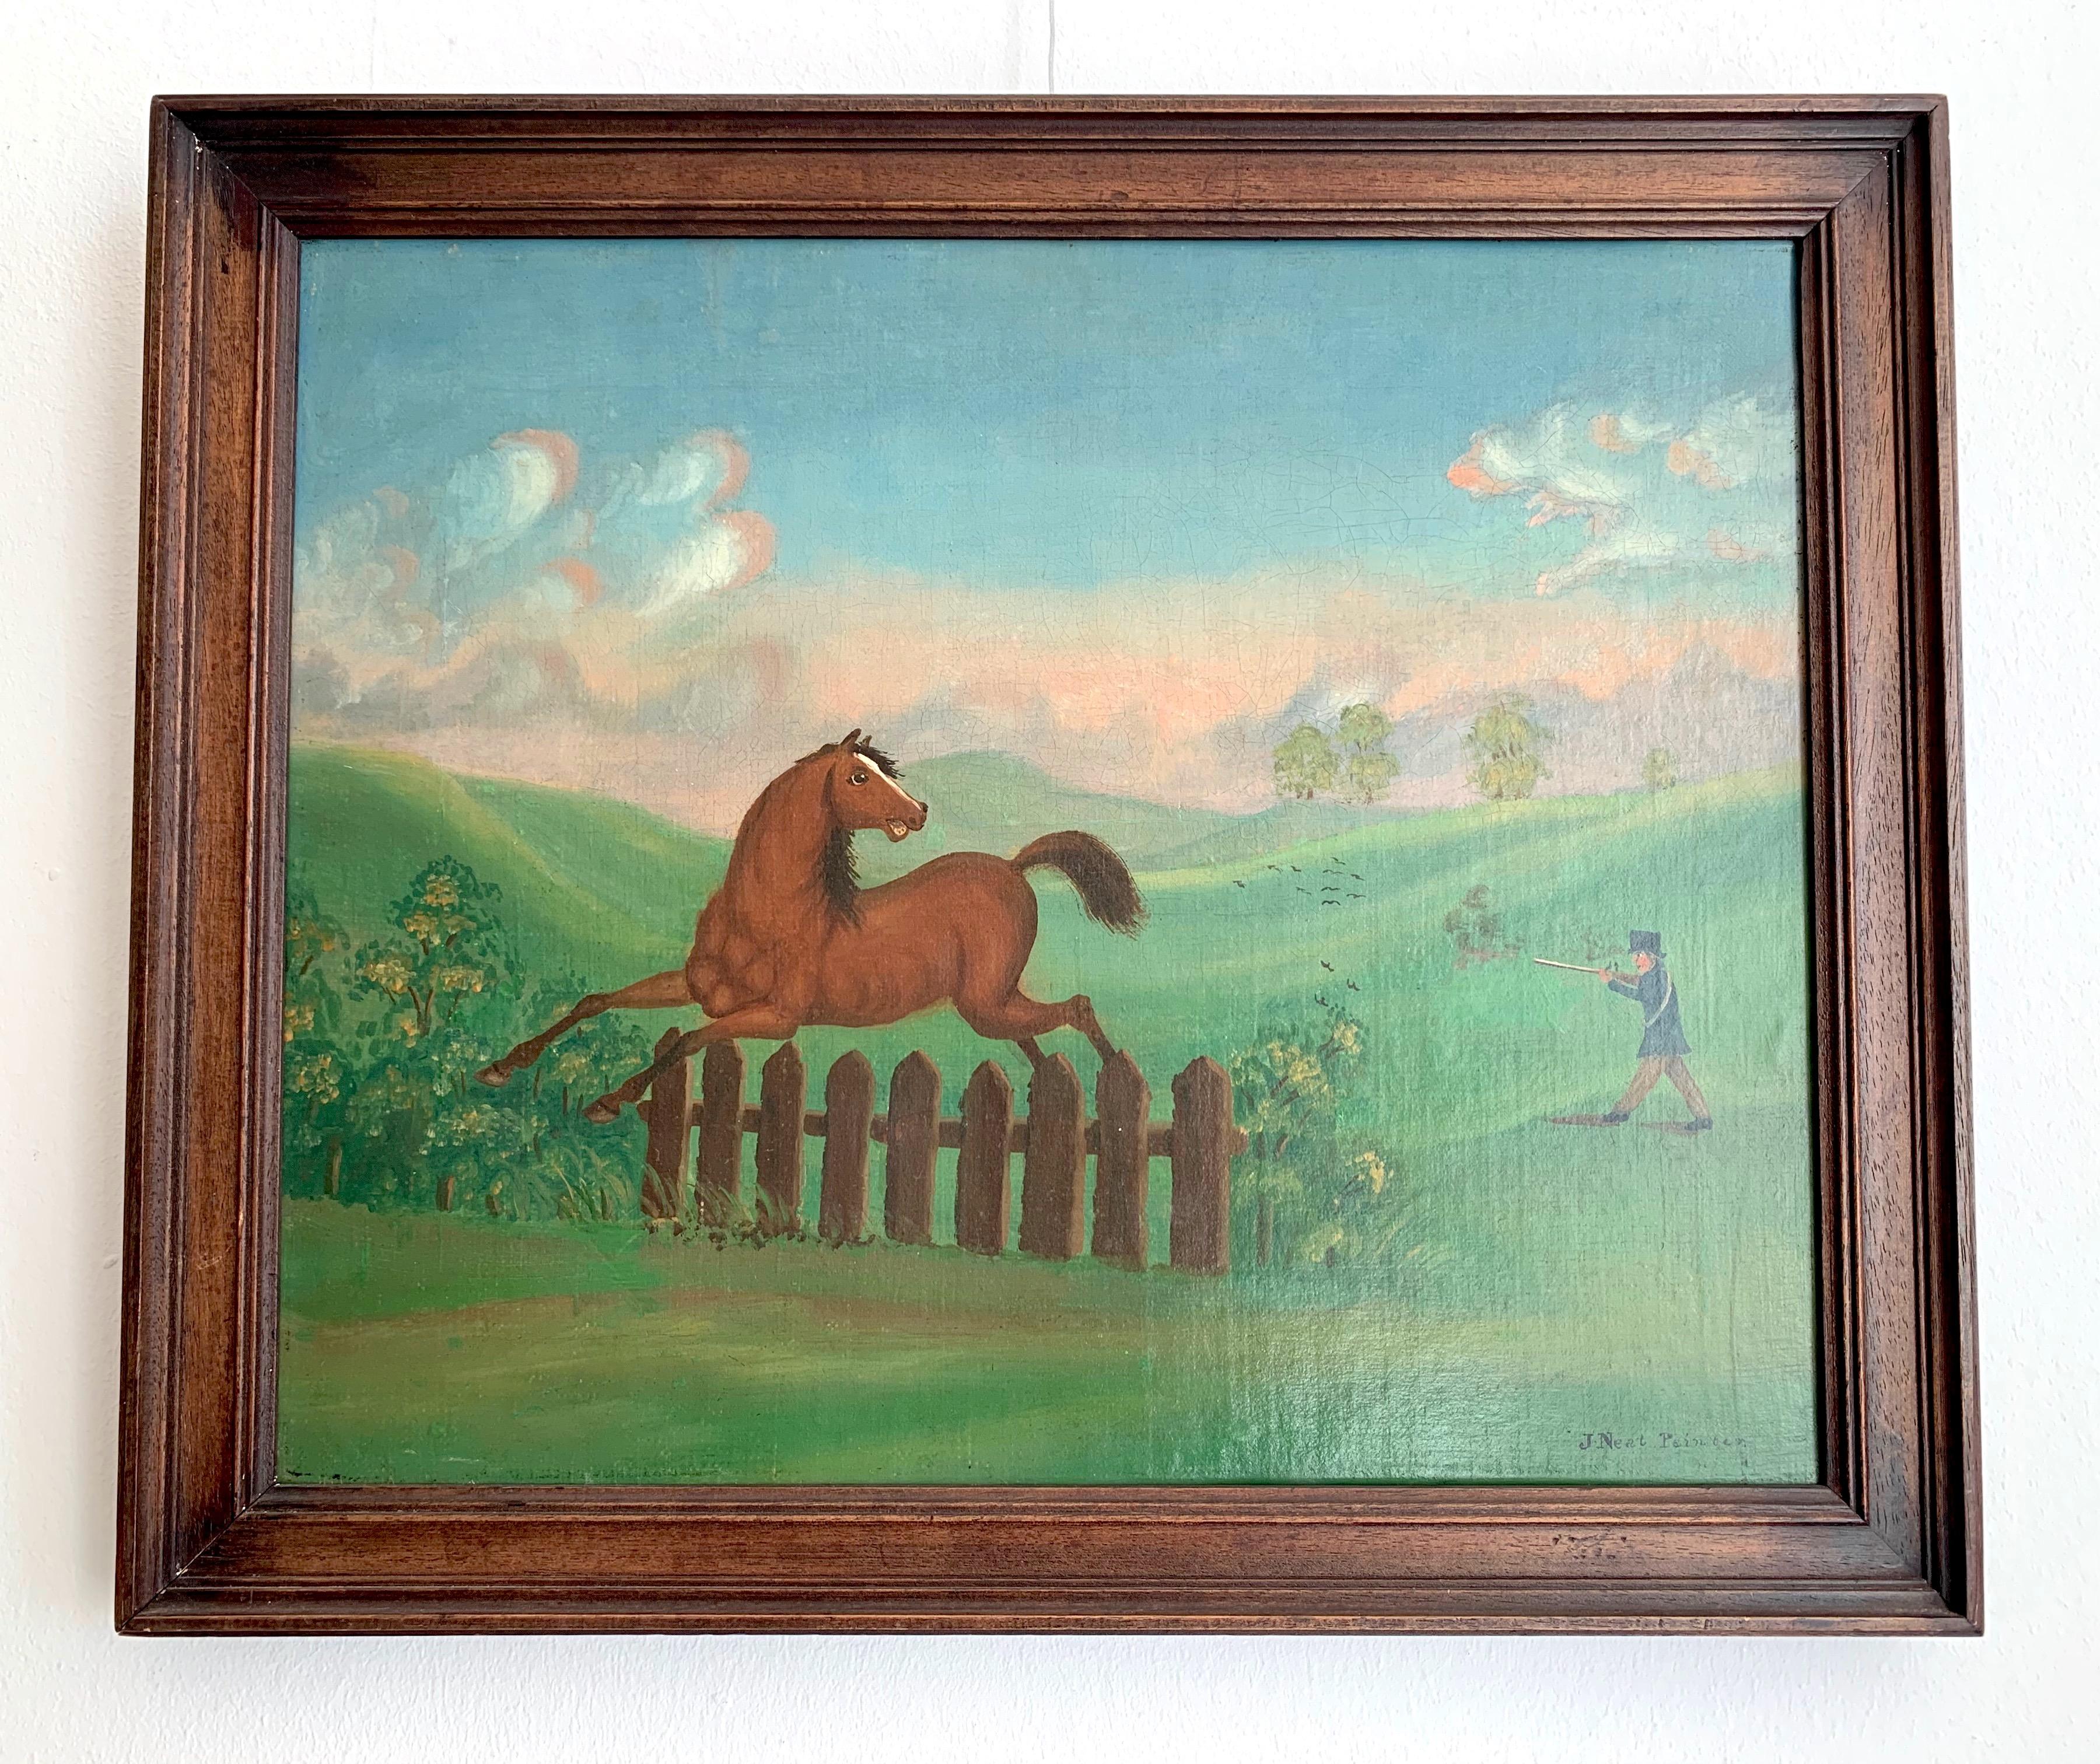 Antique 1900 Oil Painting of a Horse and a Hunter in Landscape Signed J.Neat In Good Condition For Sale In Munich, DE